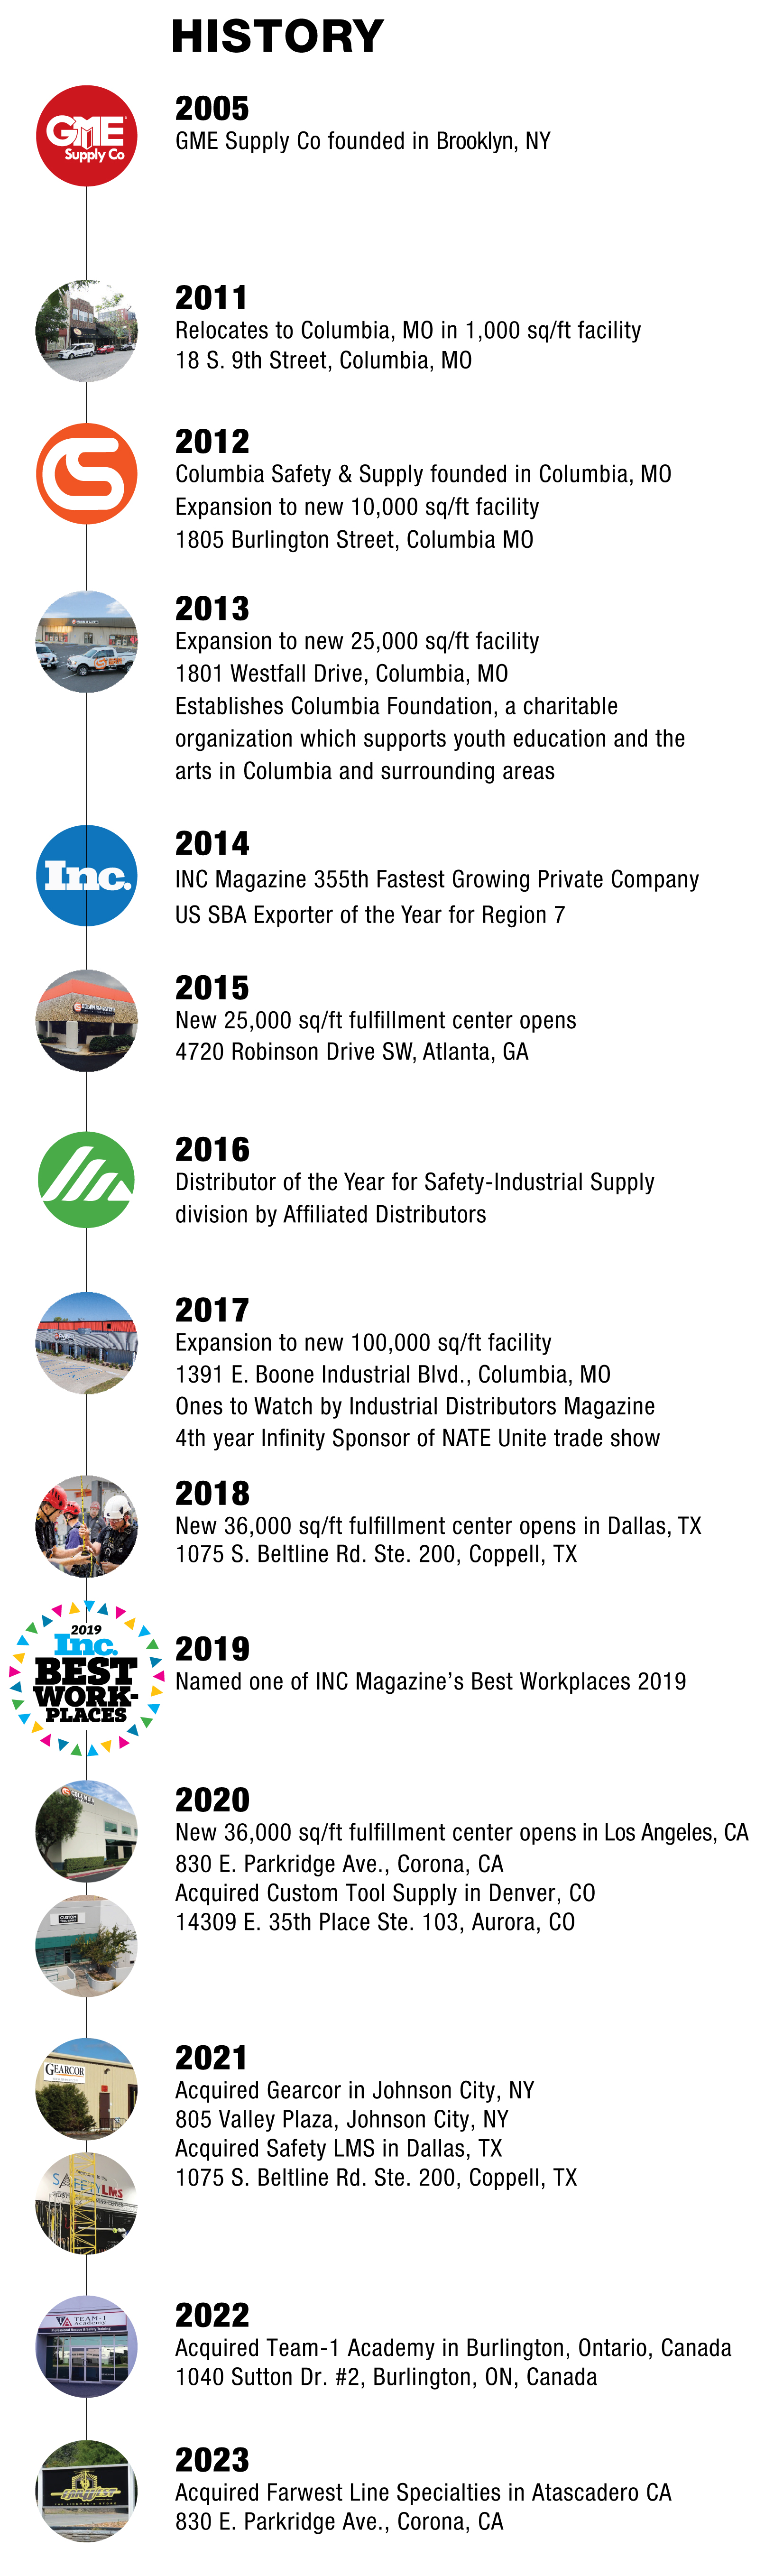 a historical timeline of Columbia Safety and Supply's growth